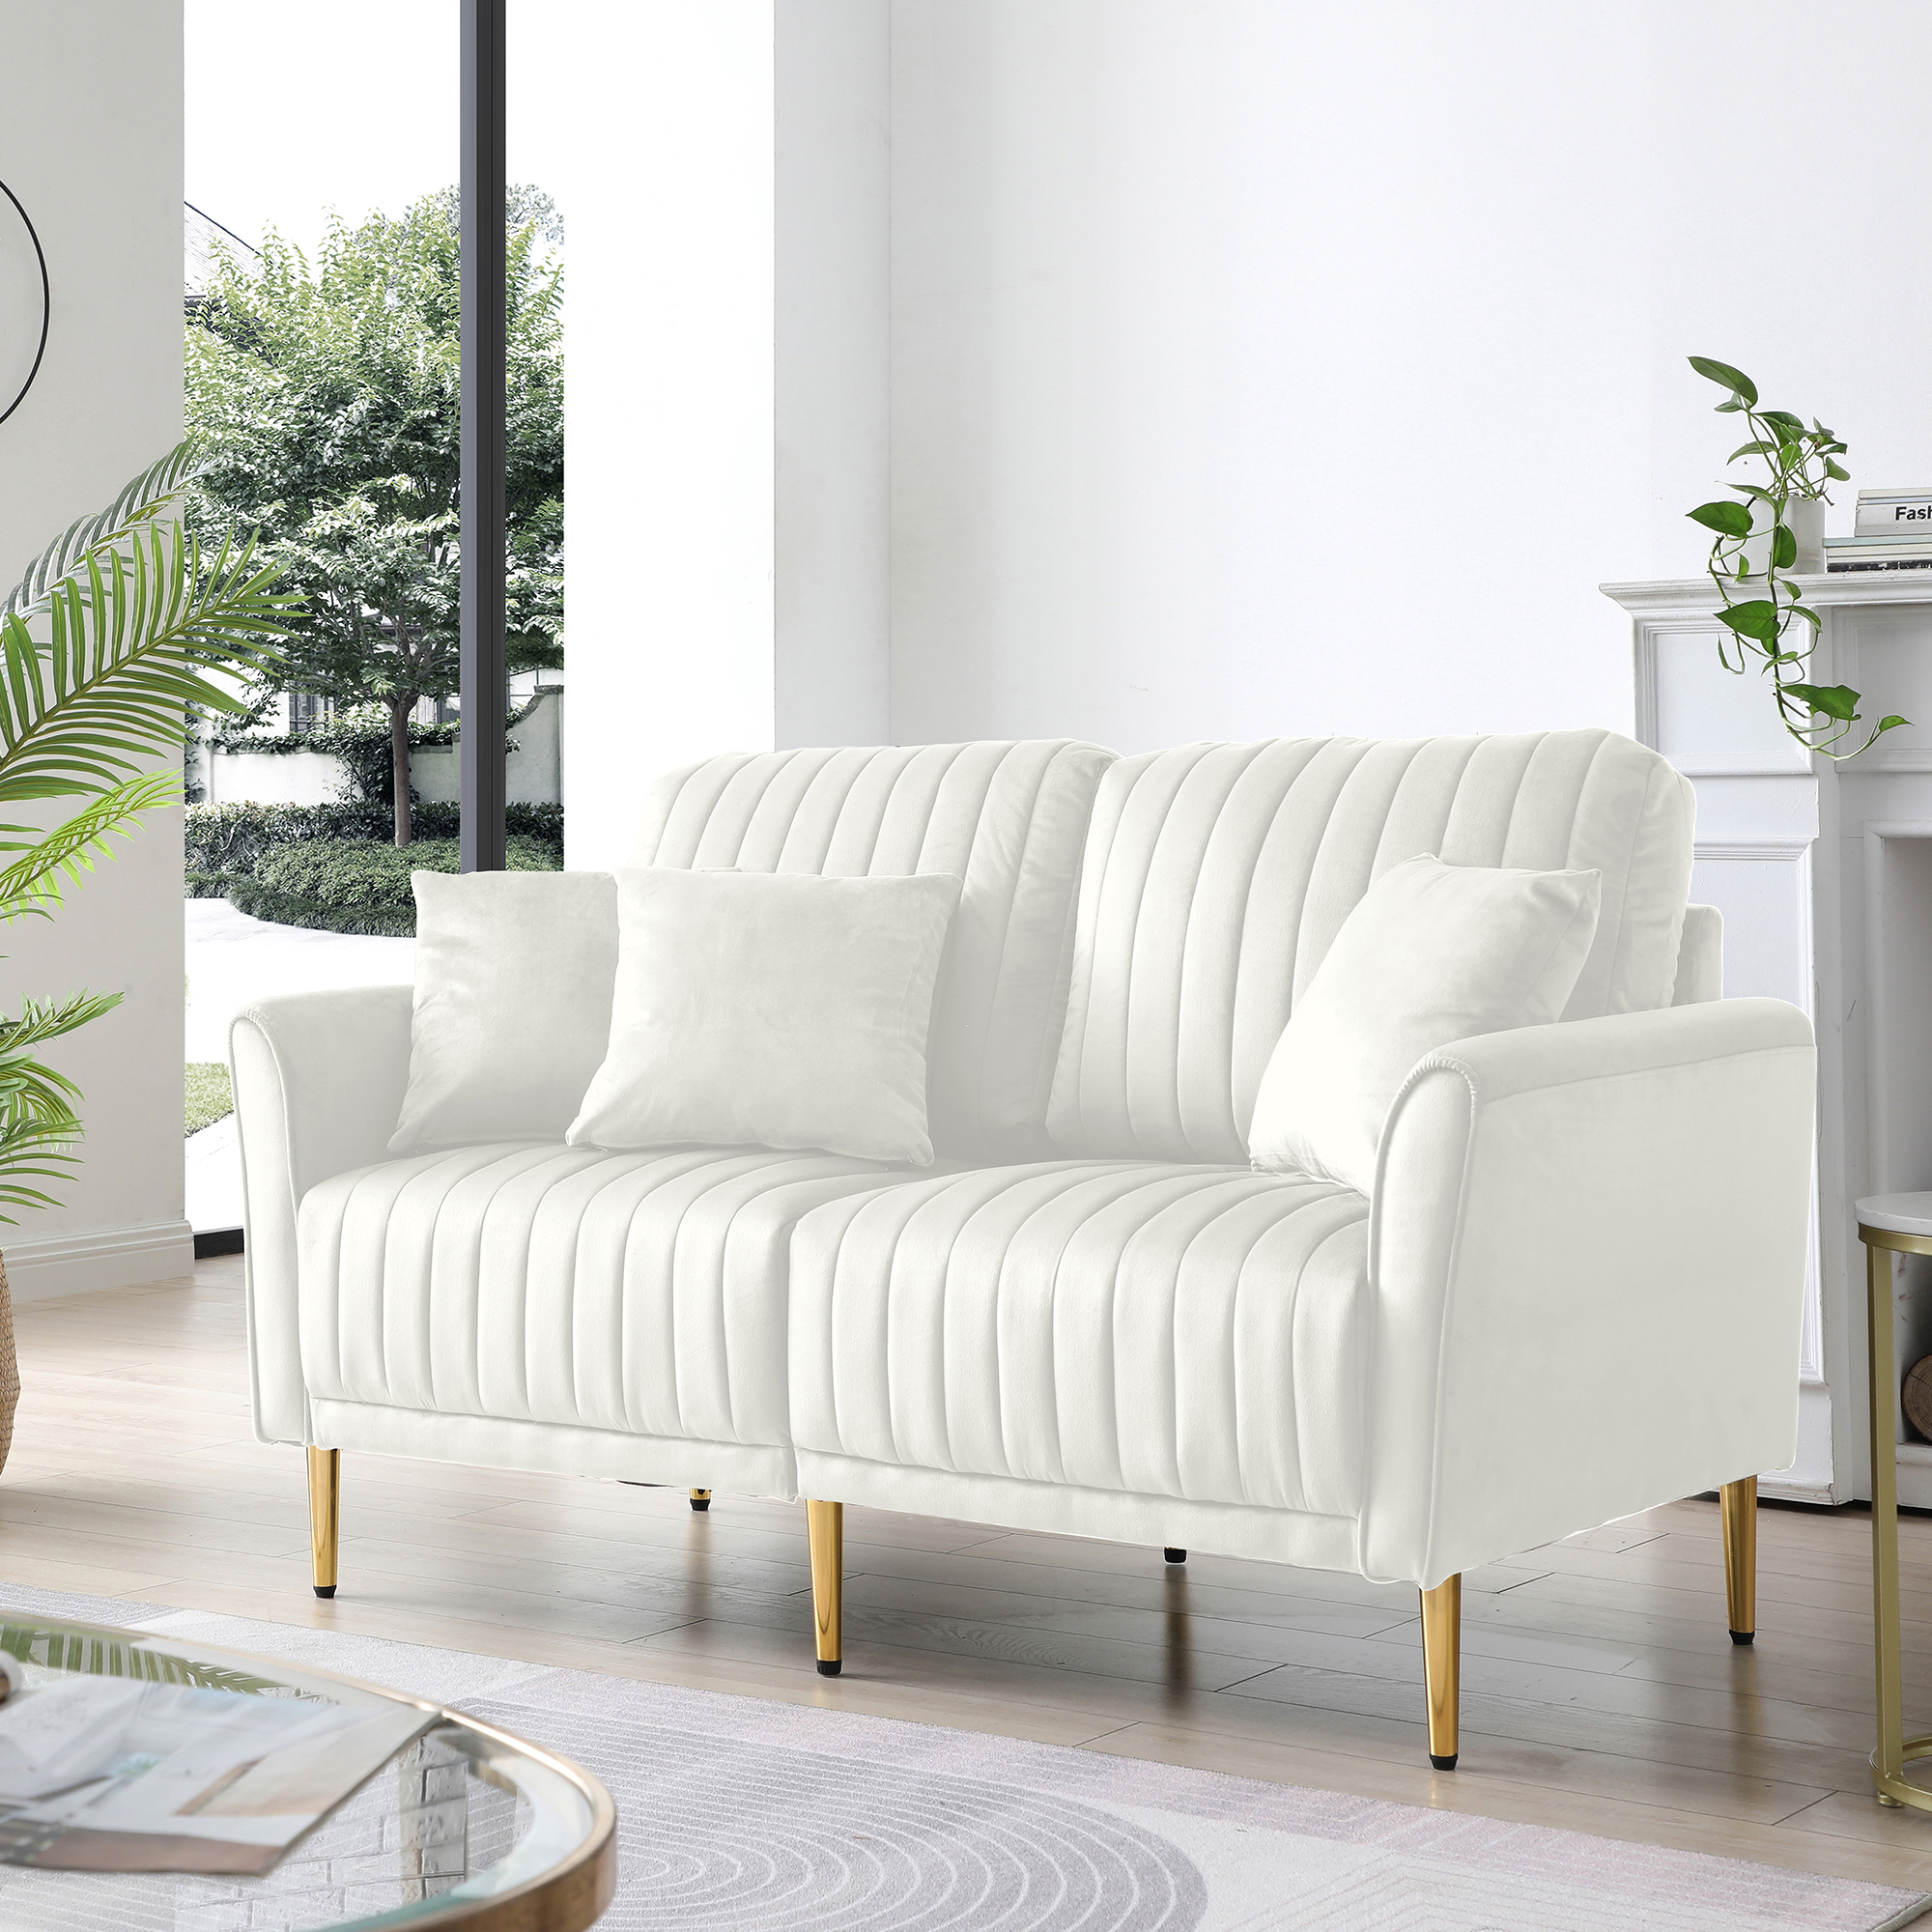 Cream White 2 Seater Loveseat Sofa Couch w/Pillows and Metal Legs, Upholstered Modern Love Seats Furniture for Bedroom, Office, Small Space, Apartment